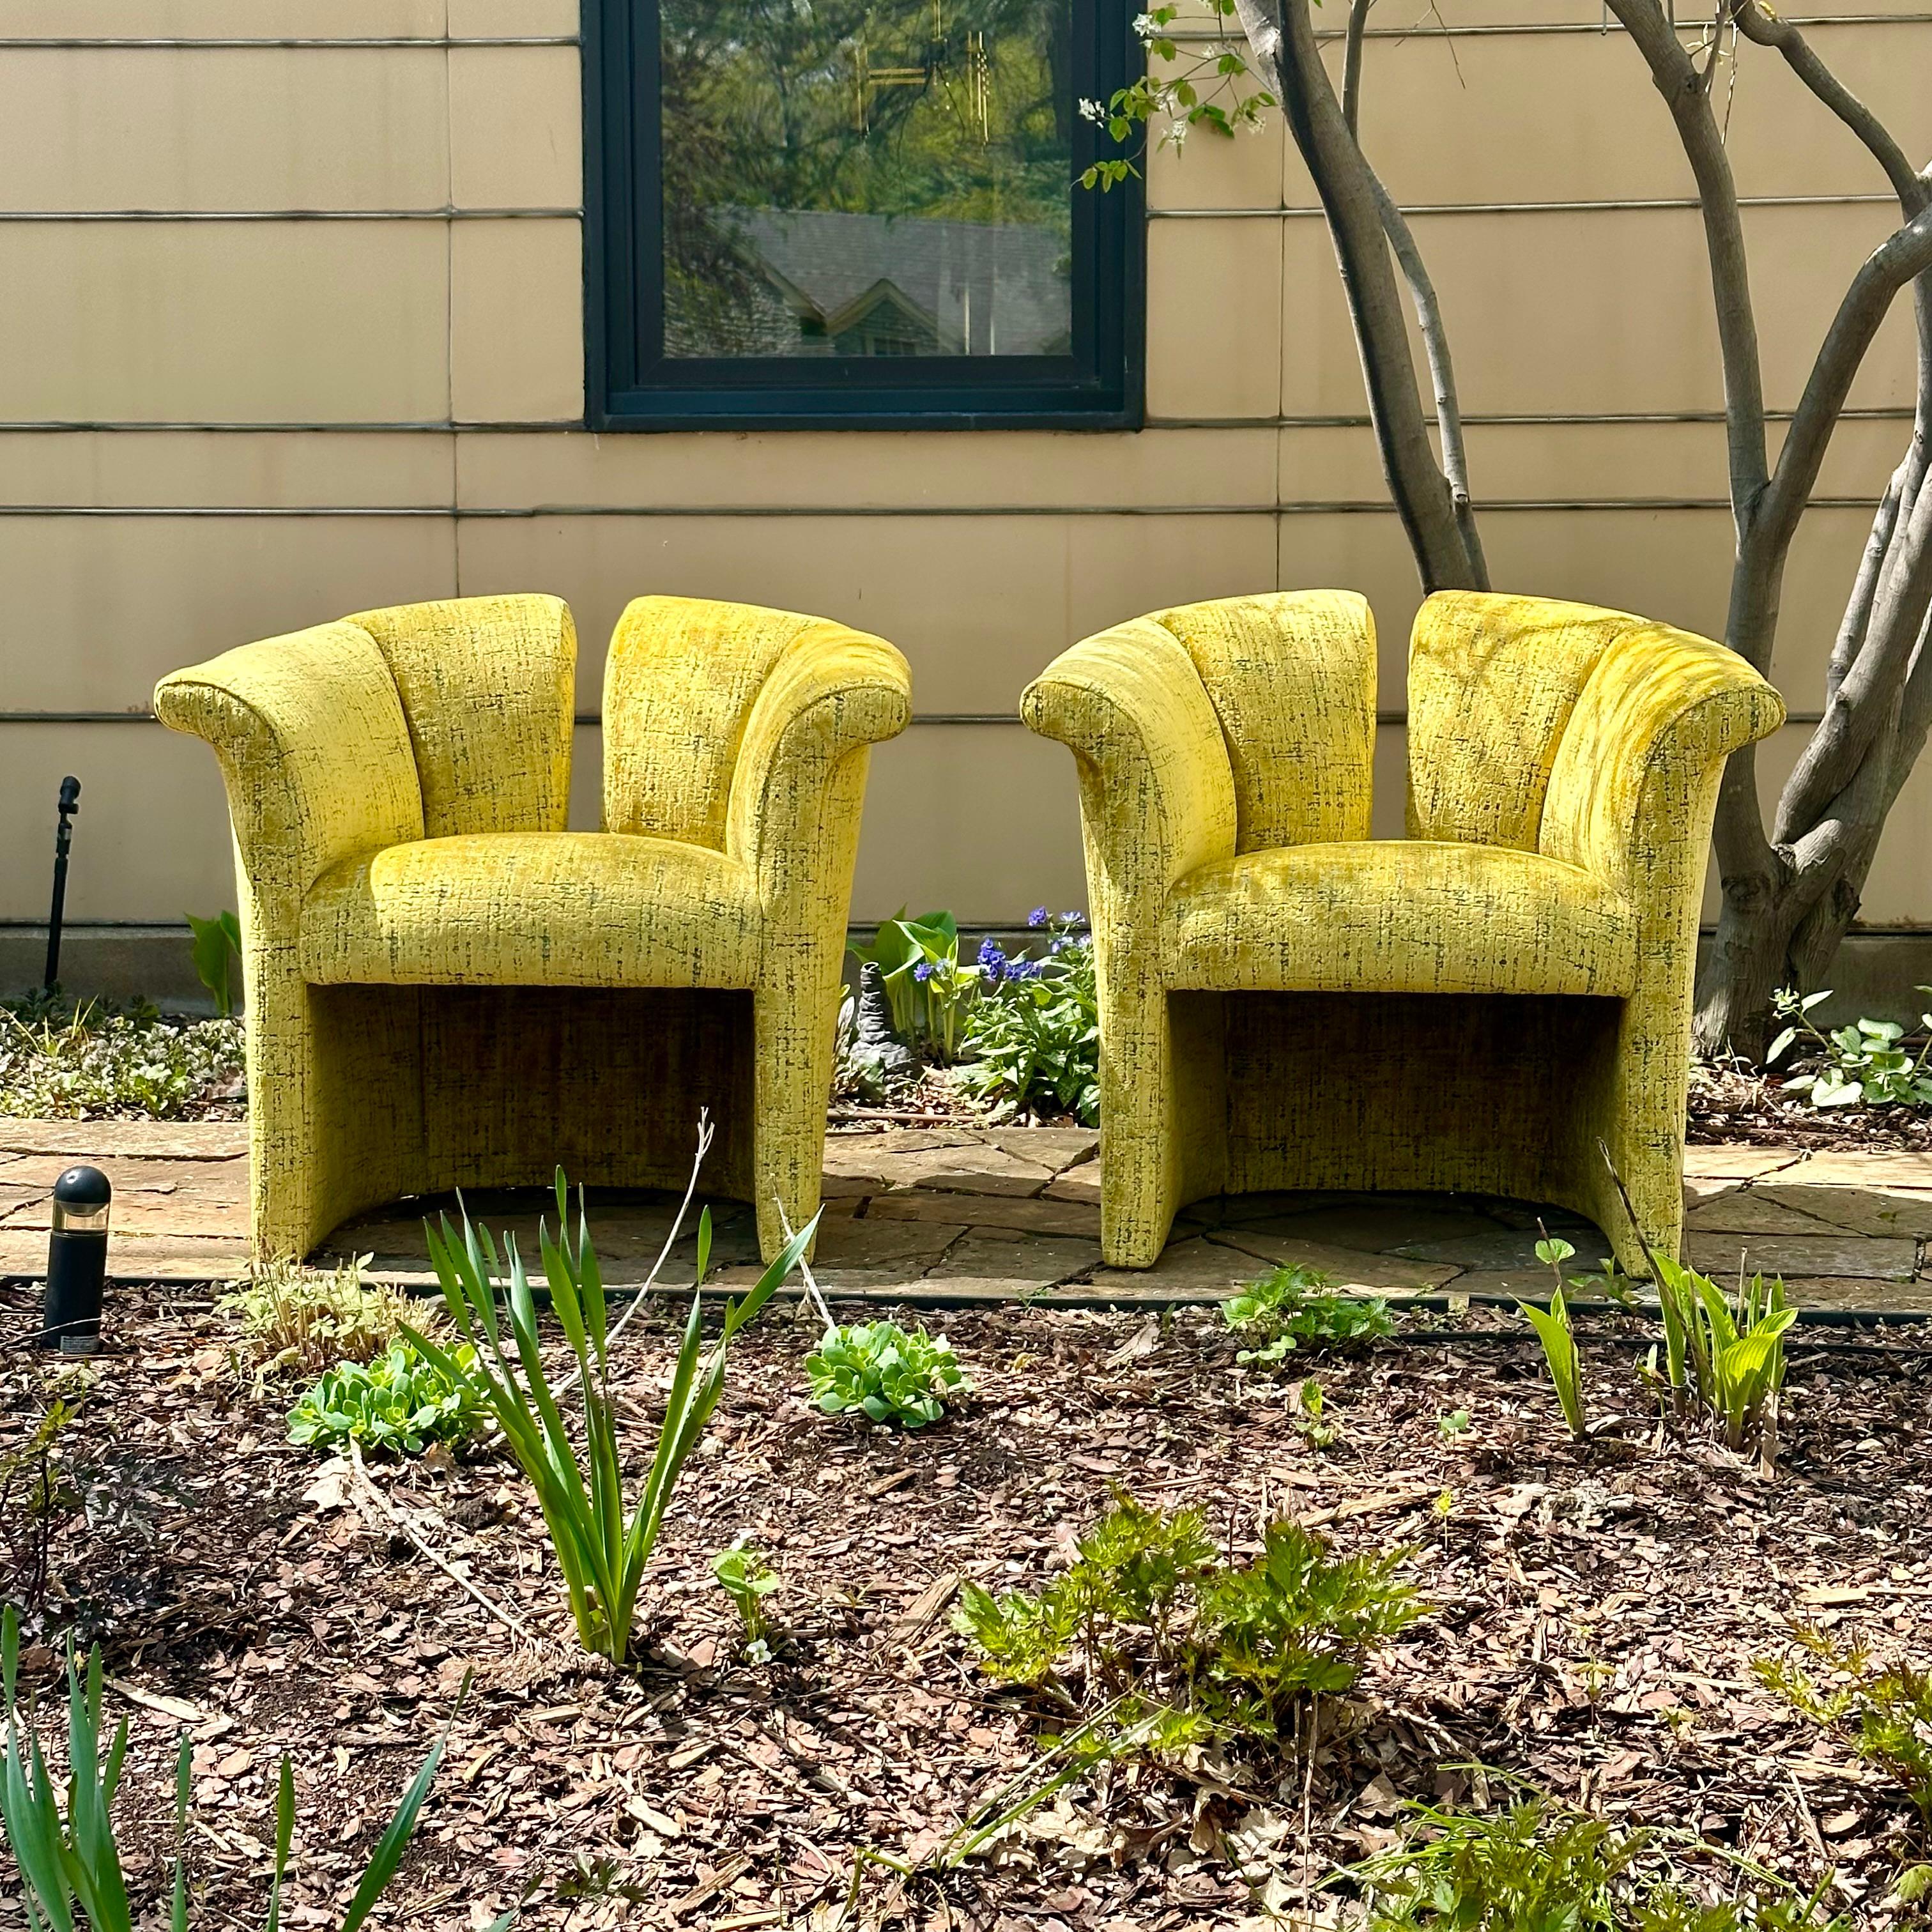 Designed by Milo Baughman for Thayer Coggin, these split back lounge chairs are both gorgeous and comfortable. Reupholstered in a soft velvet jacquard by Covington Moonstruck Sulpher. The acidic yellow/gold color takes center stage with bits of teal